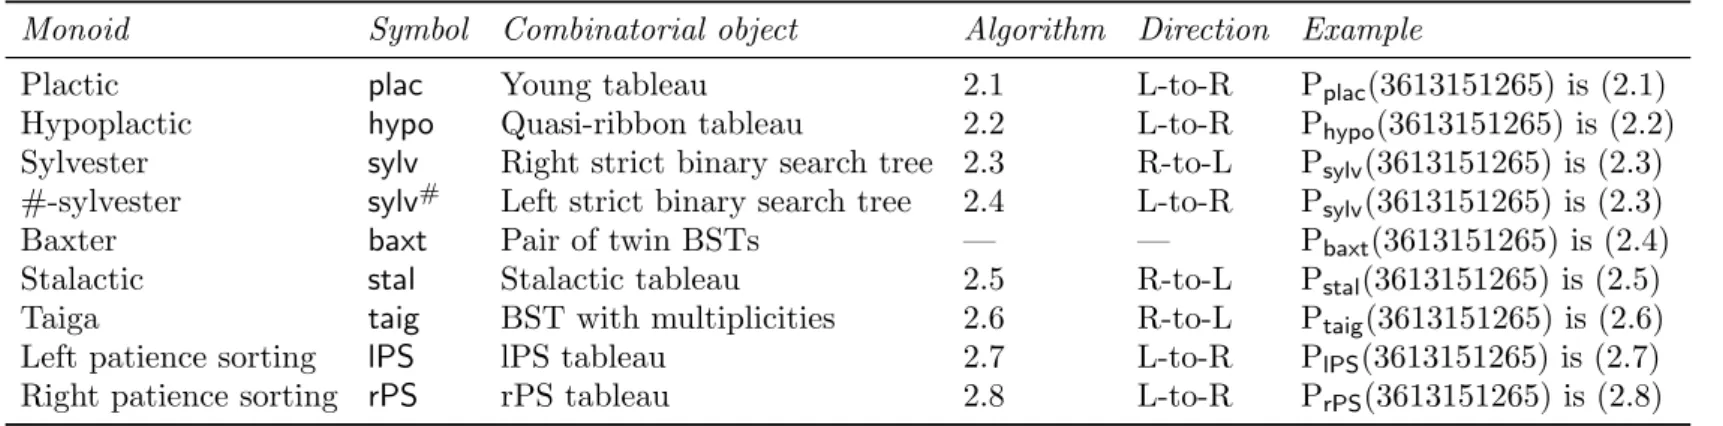 Table 2. Insertion algorithms used to compute combinatorial objects, and the corresponding monoids